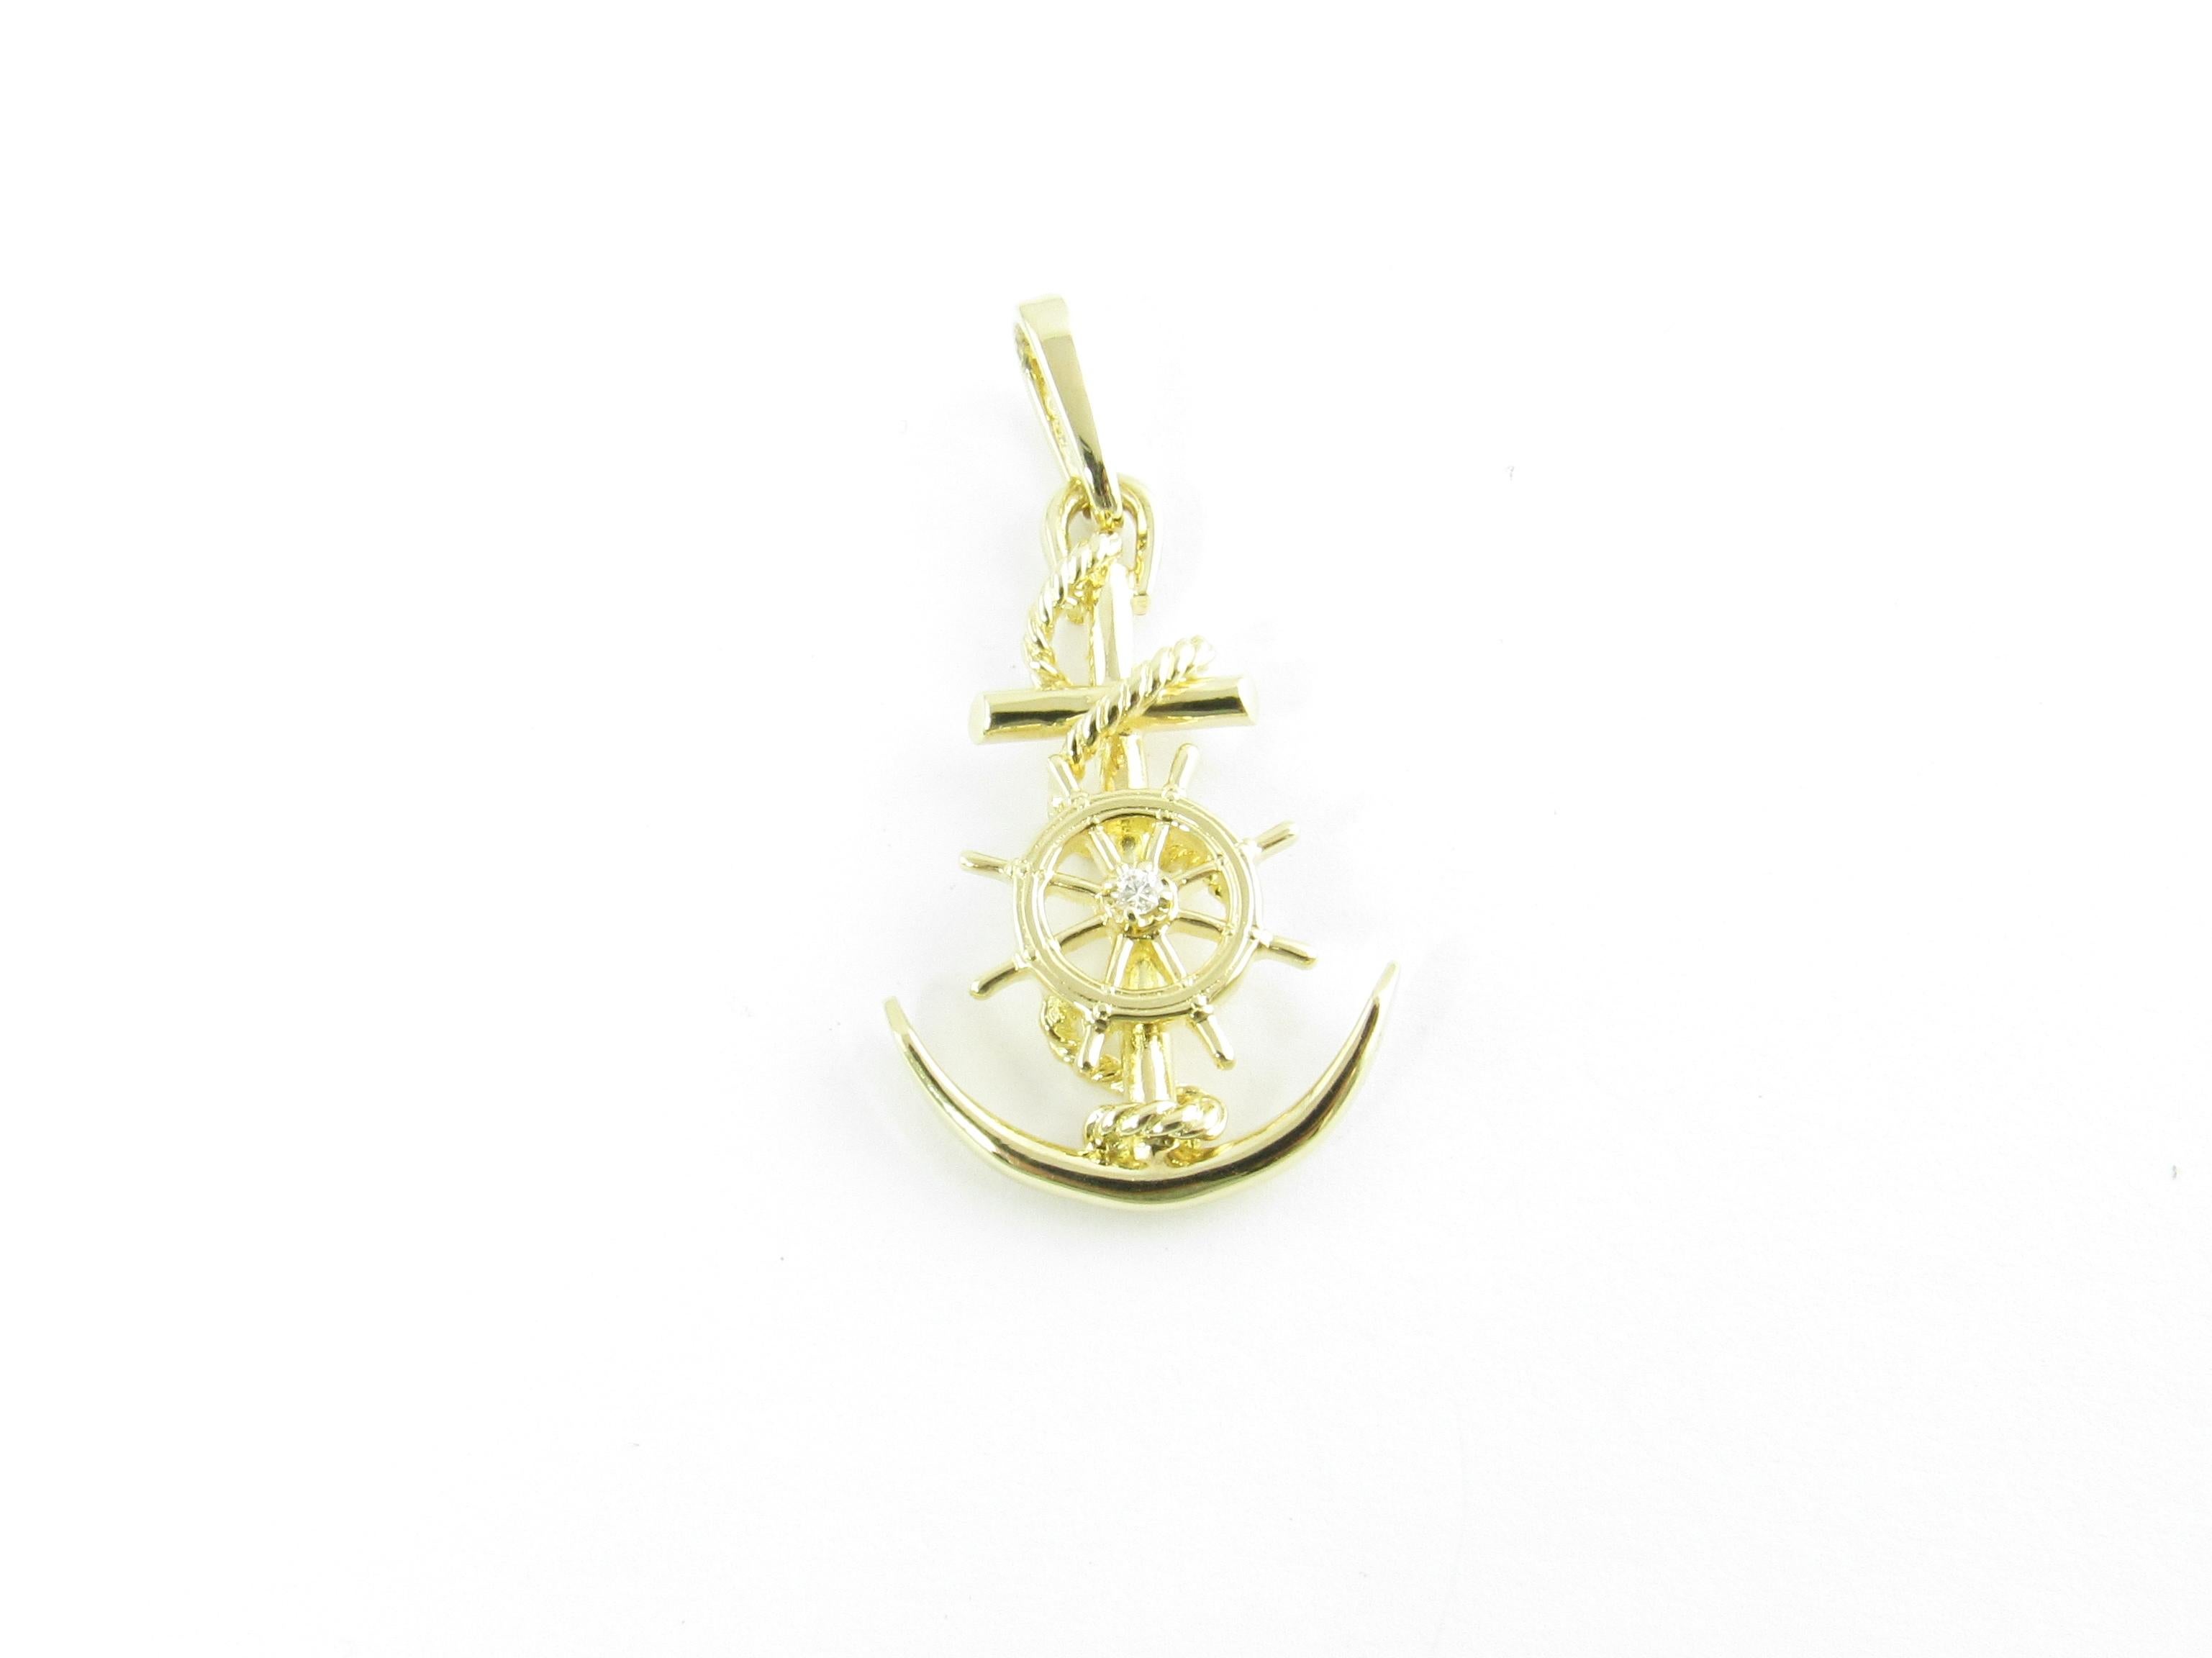 Vintage 14 Karat Yellow Gold and Diamond Anchor and Ship's Wheel Pendant

This lovely 3D charm features a beautifully detailed anchor and ship's wheel accented with one round brilliant cut diamond set in classic 14K yellow gold.

Approximate total